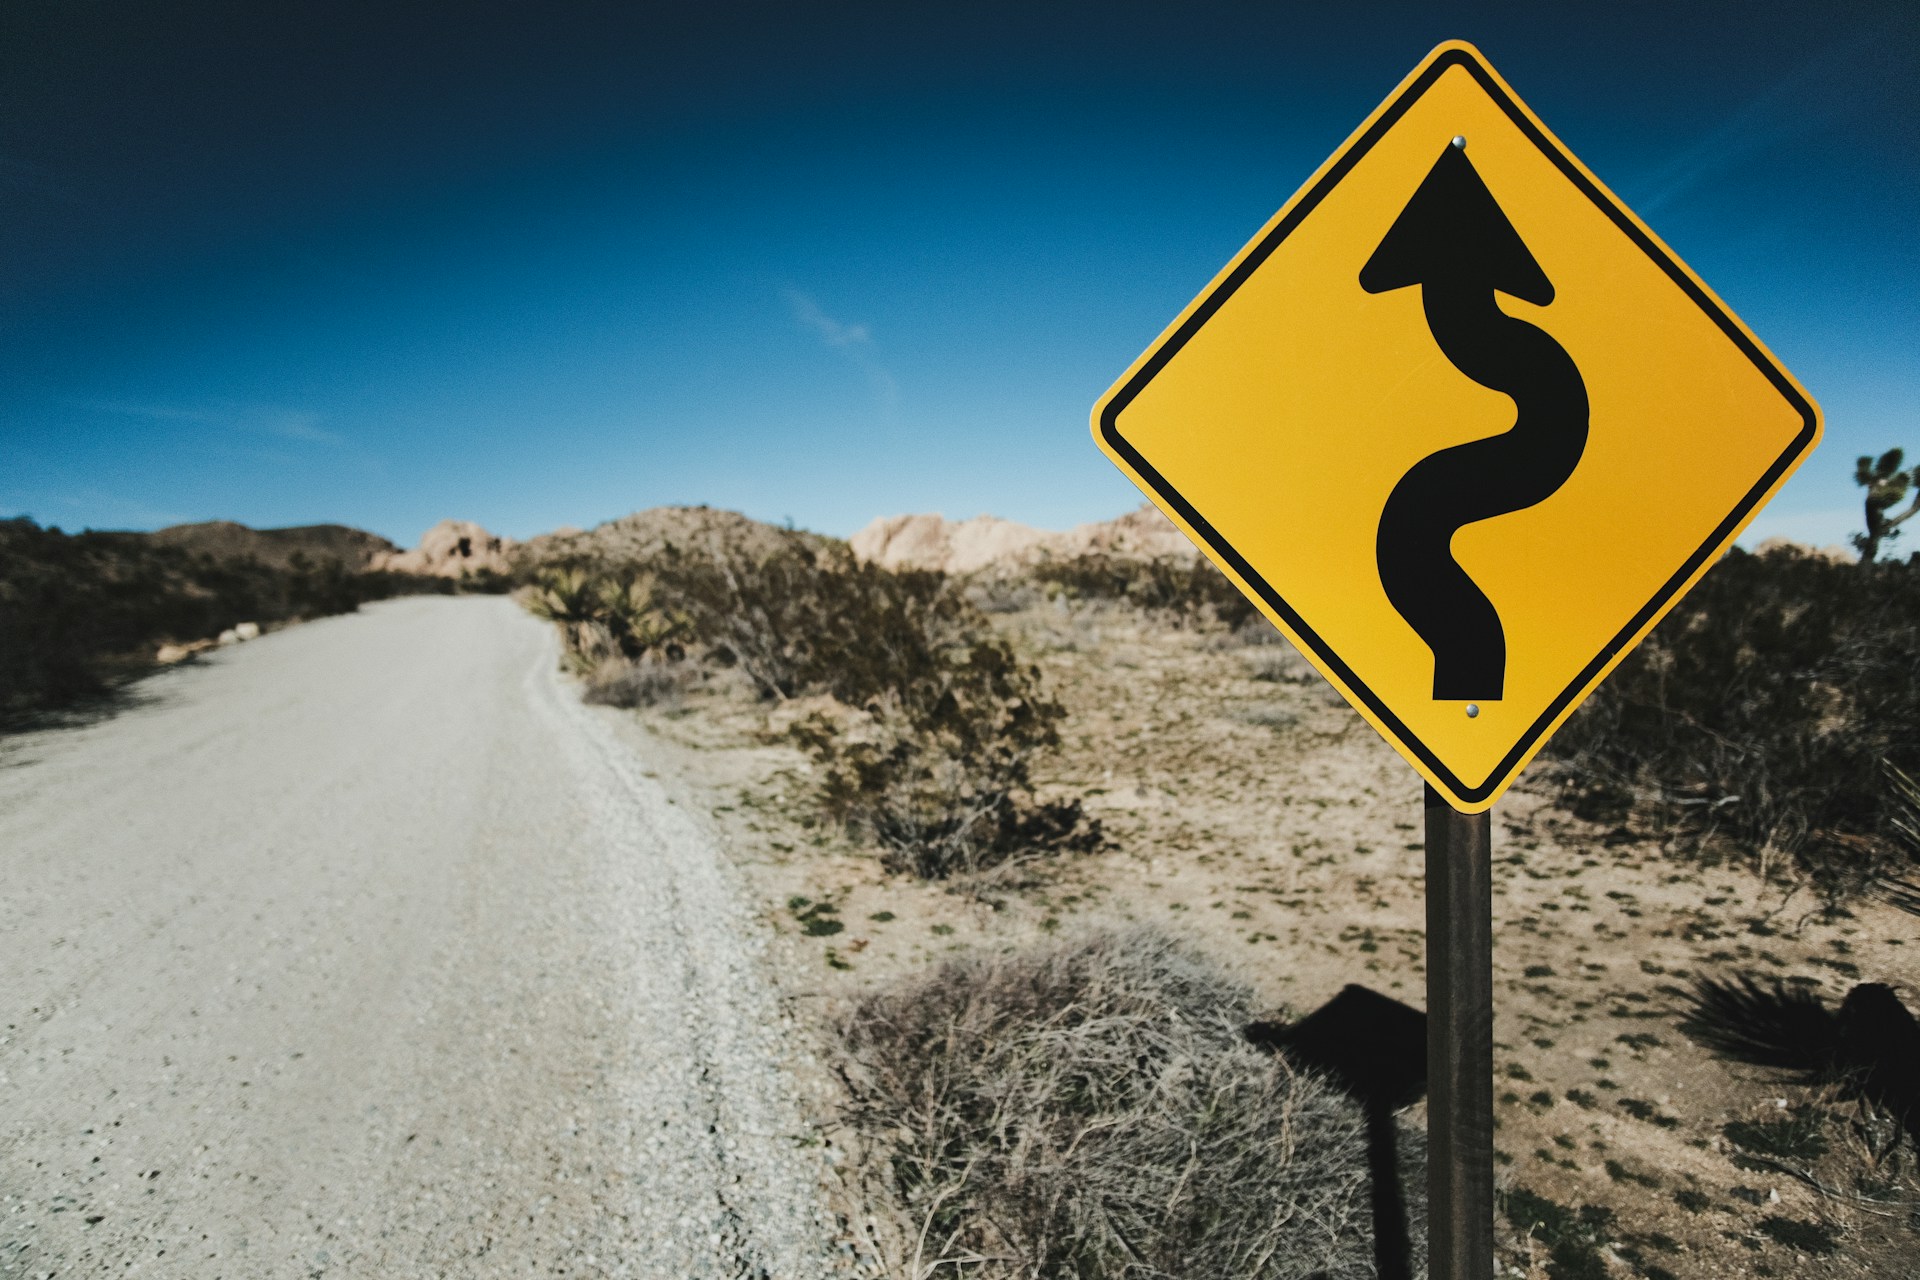 A road sign, indicating a curved road ahead.  Photo by John Gibbons on Unsplash